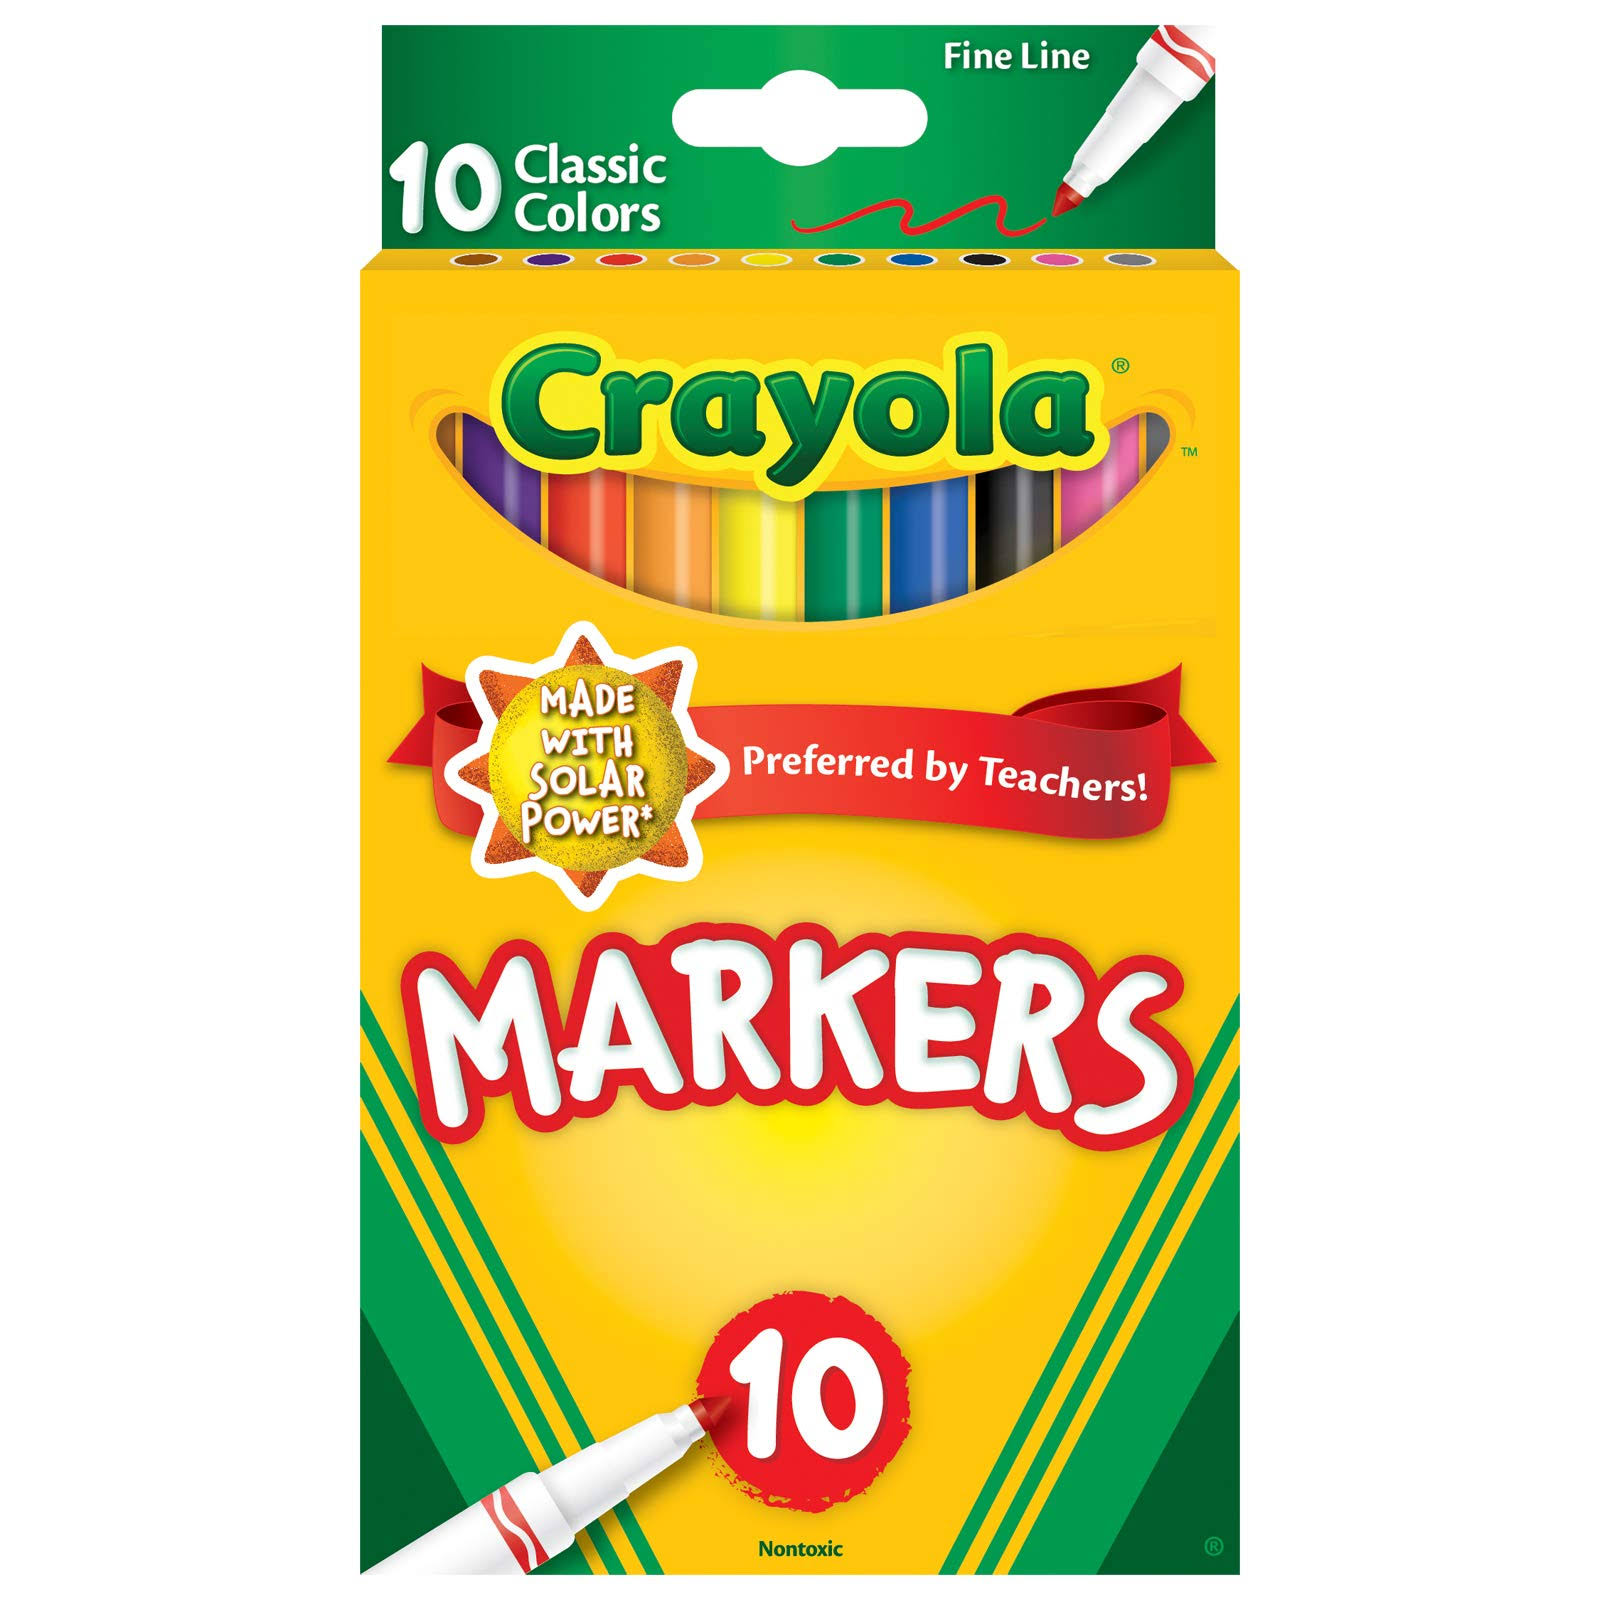 Crayola Classic Colors Fine Line Markers - x10